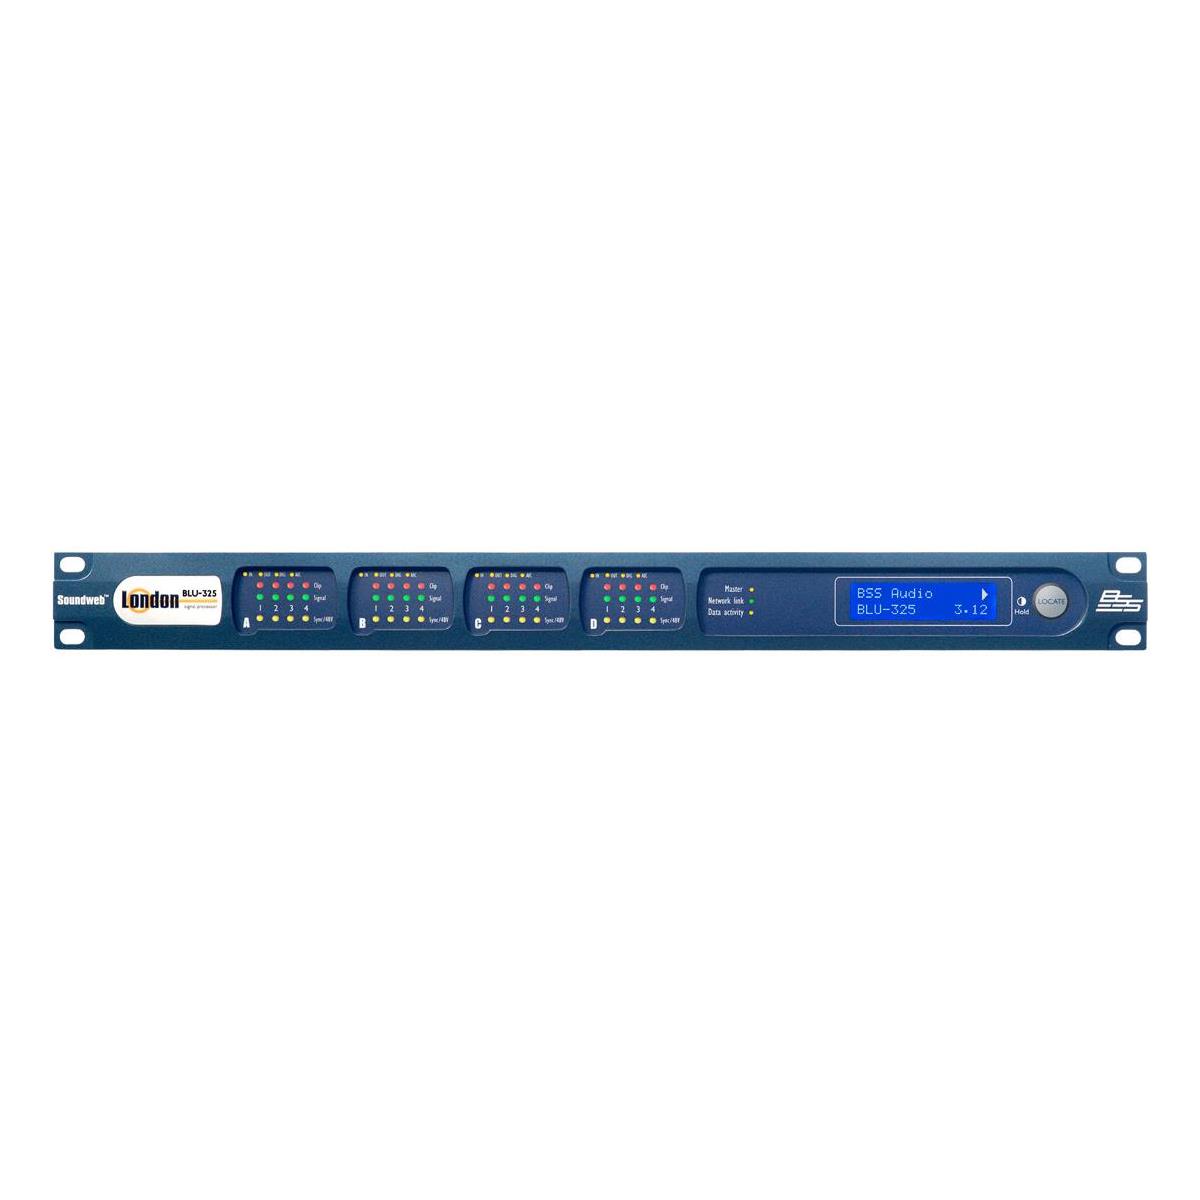 

BSS Networked Input Output Expander with AVB & BLU Link Chassis